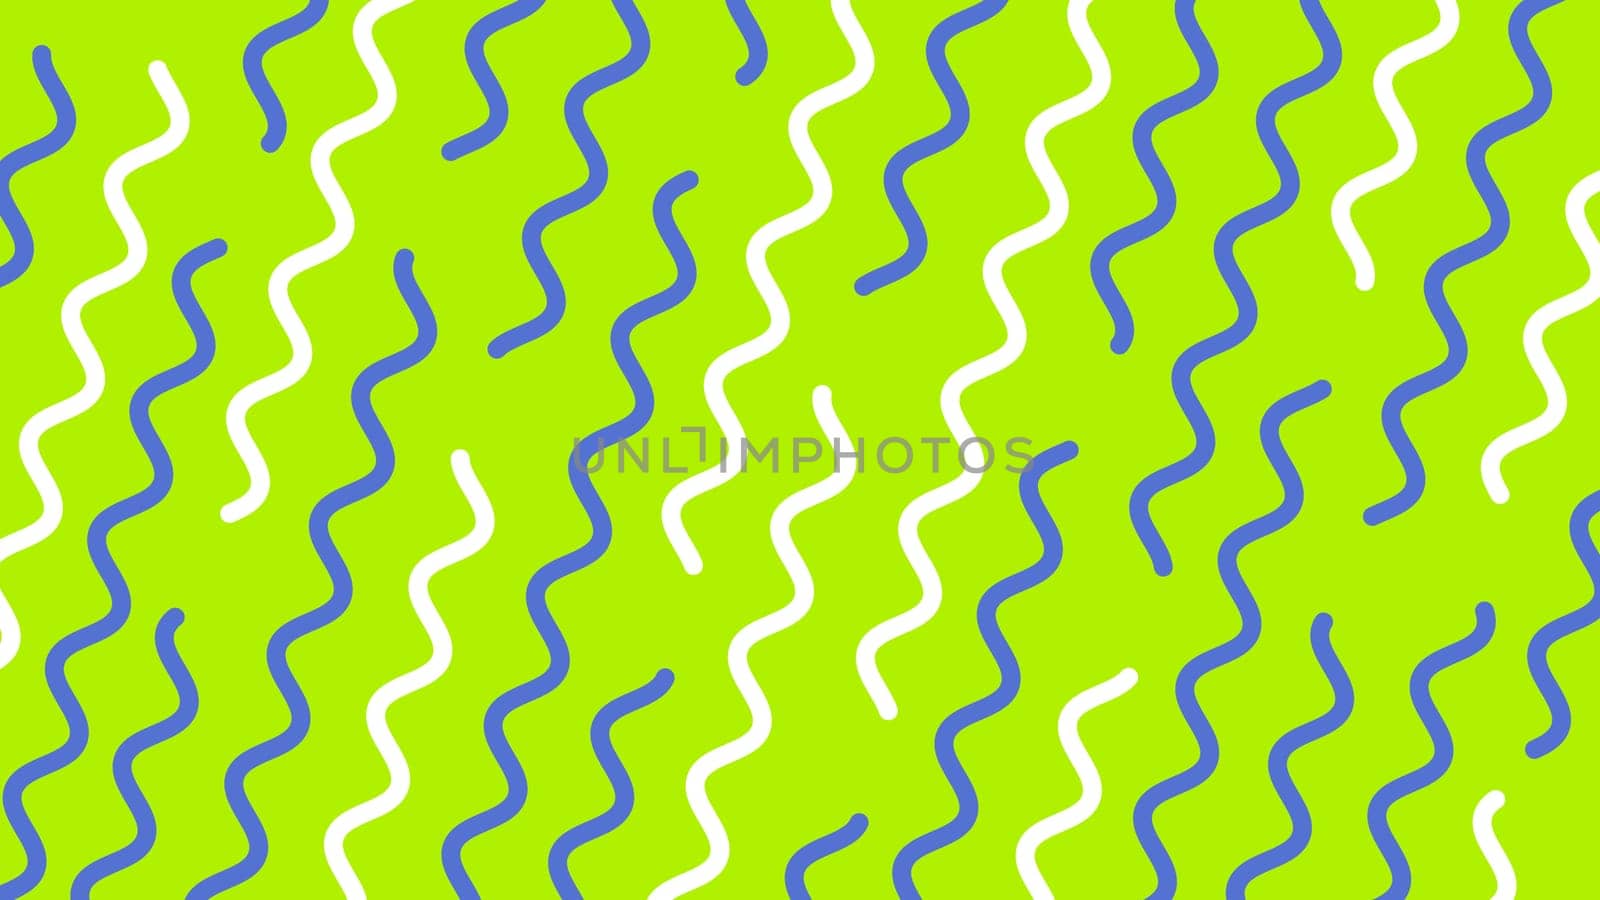 Minimal modern zig zag background. White and navy blue curved line on green background. High quality